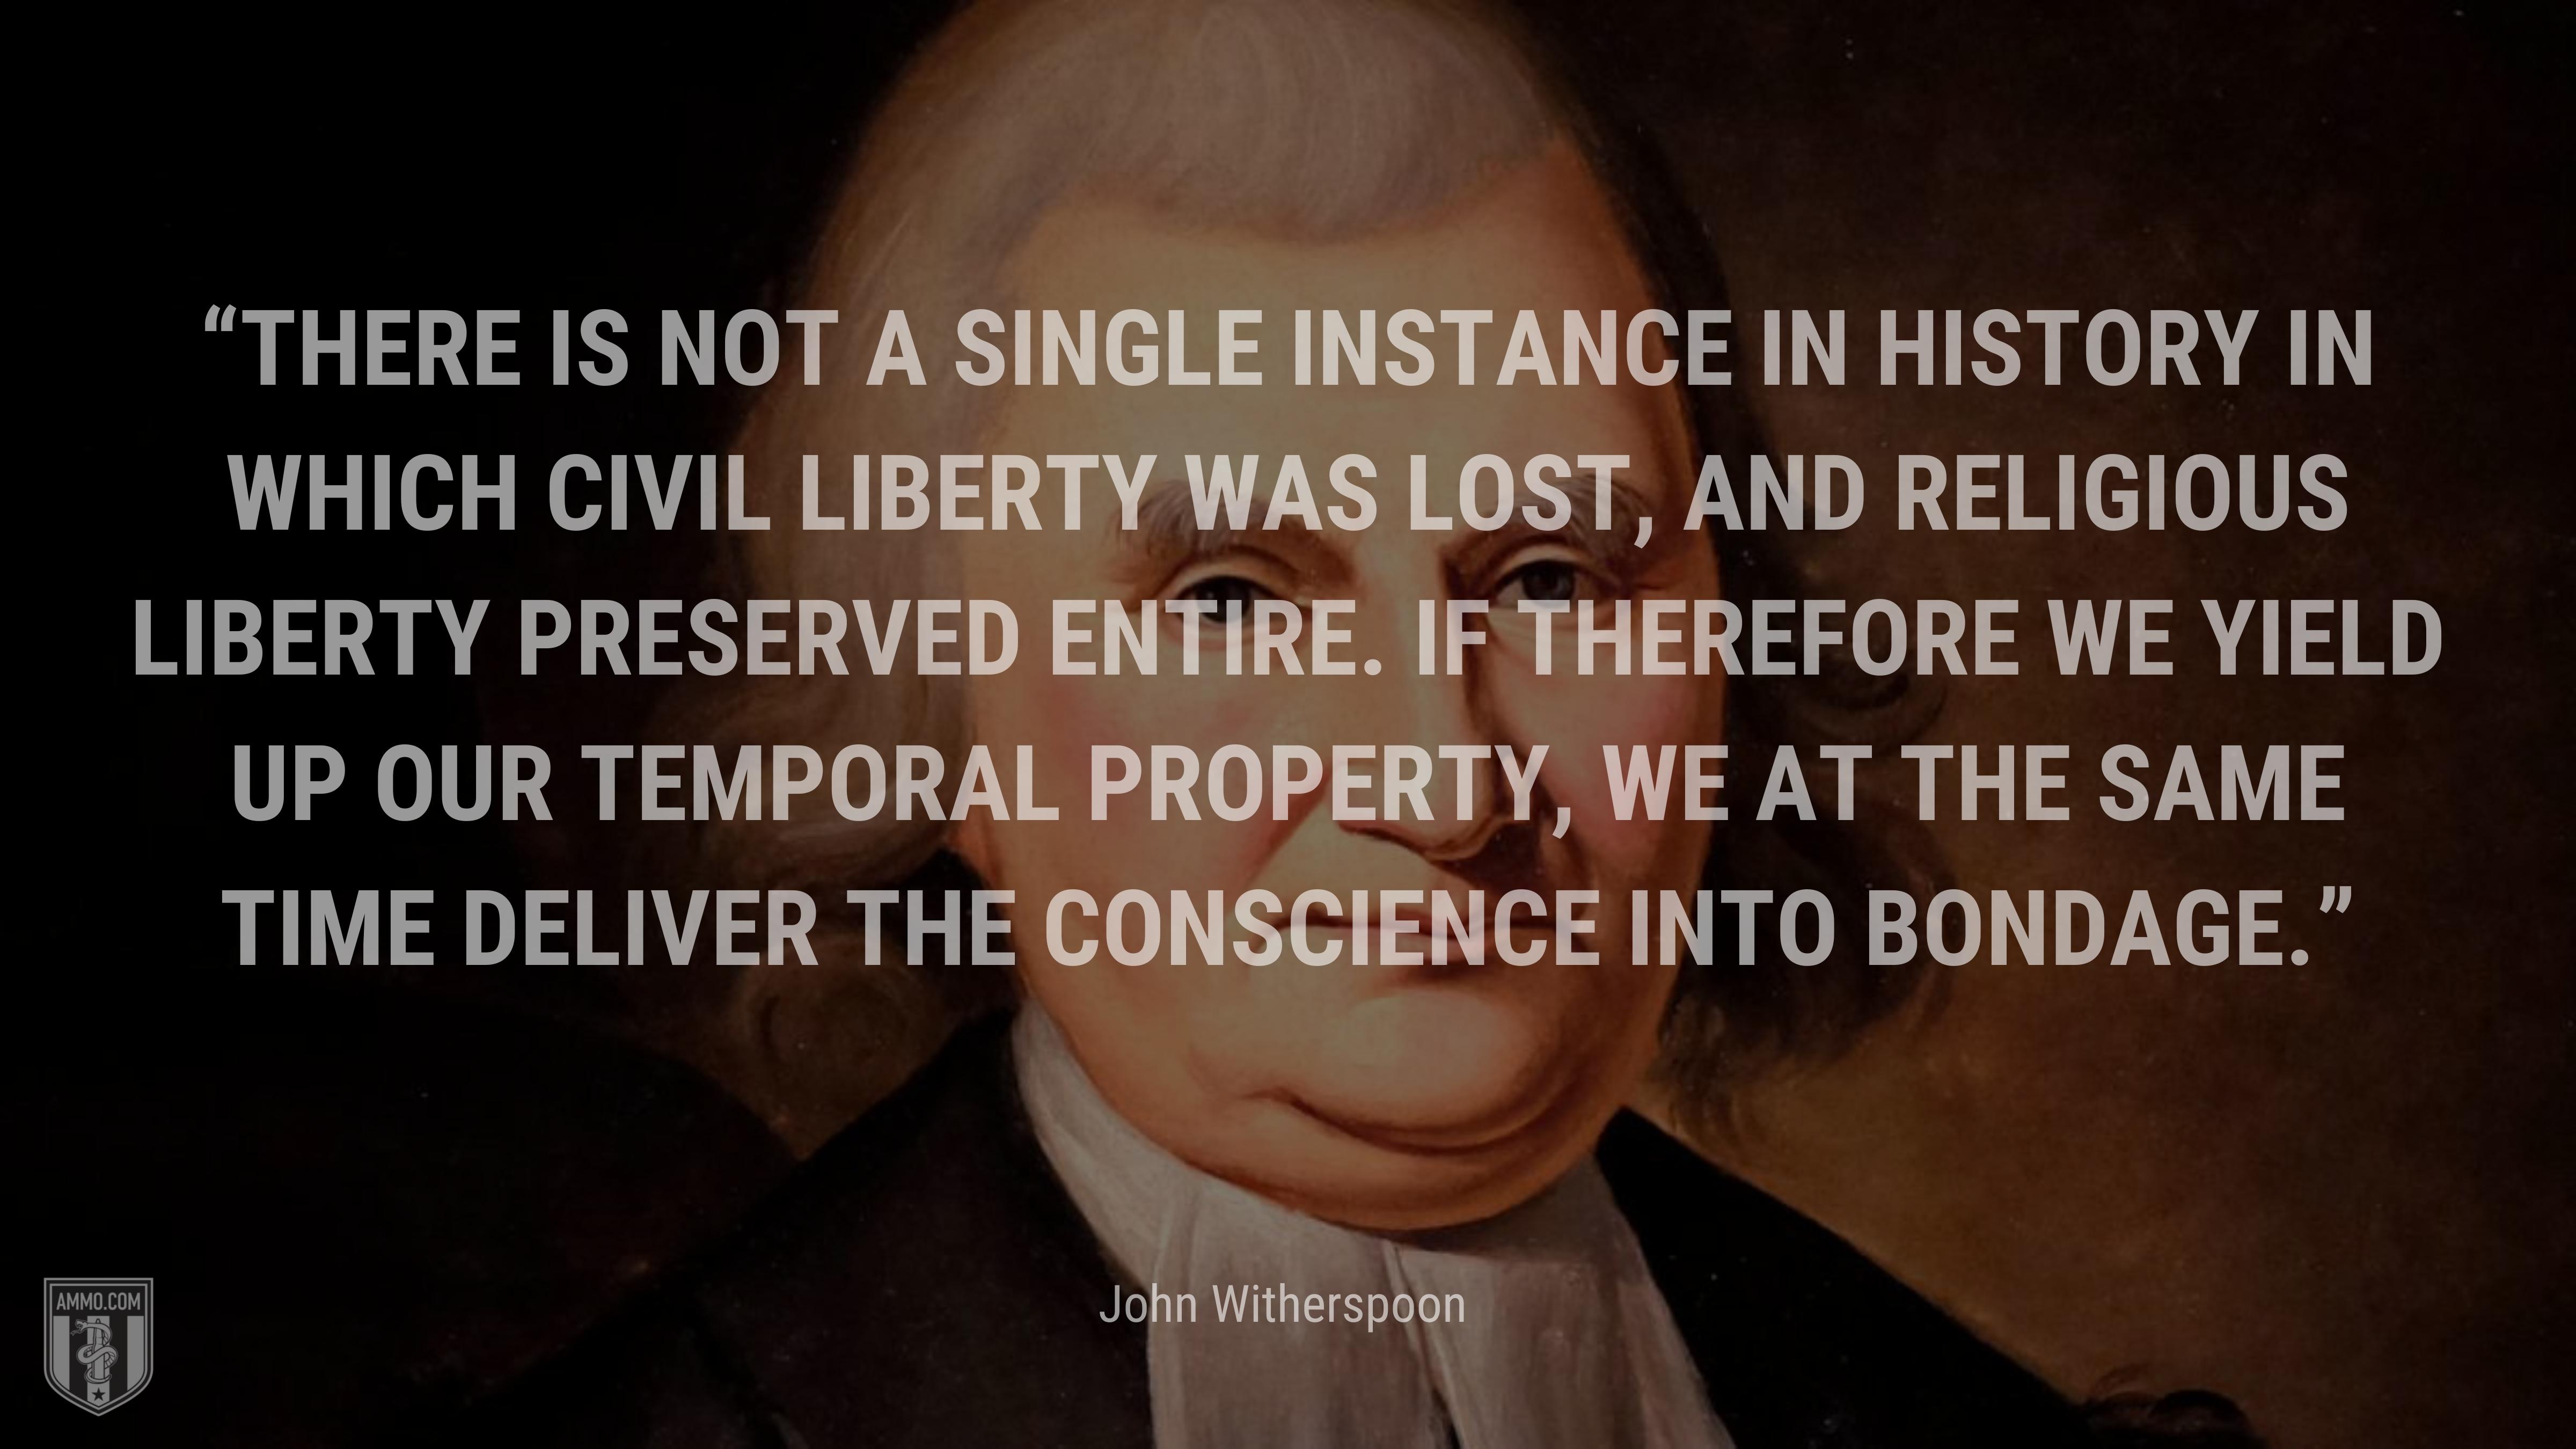 “There is not a single instance in history in which civil liberty was lost, and religious liberty preserved entire. If therefore we yield up our temporal property, we at the same time deliver the conscience into bondage.” - John Witherspoon